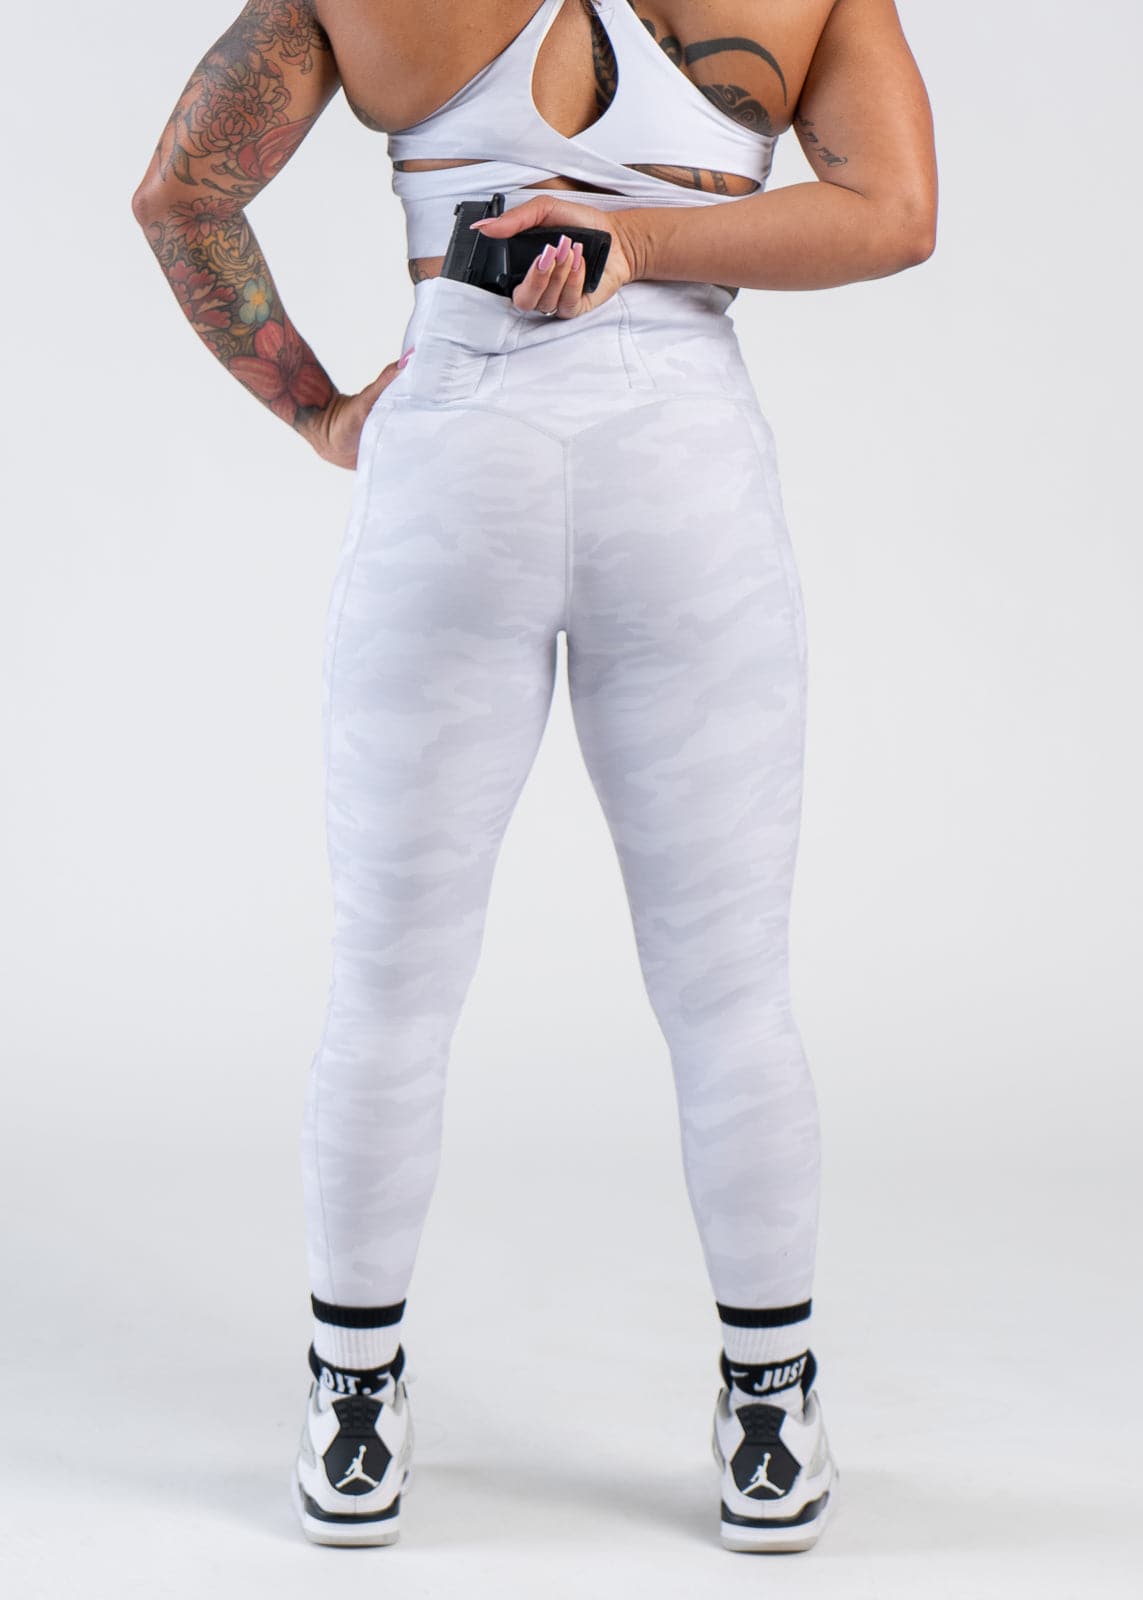 Concealed Carry Leggings With Pockets | Snow Camo